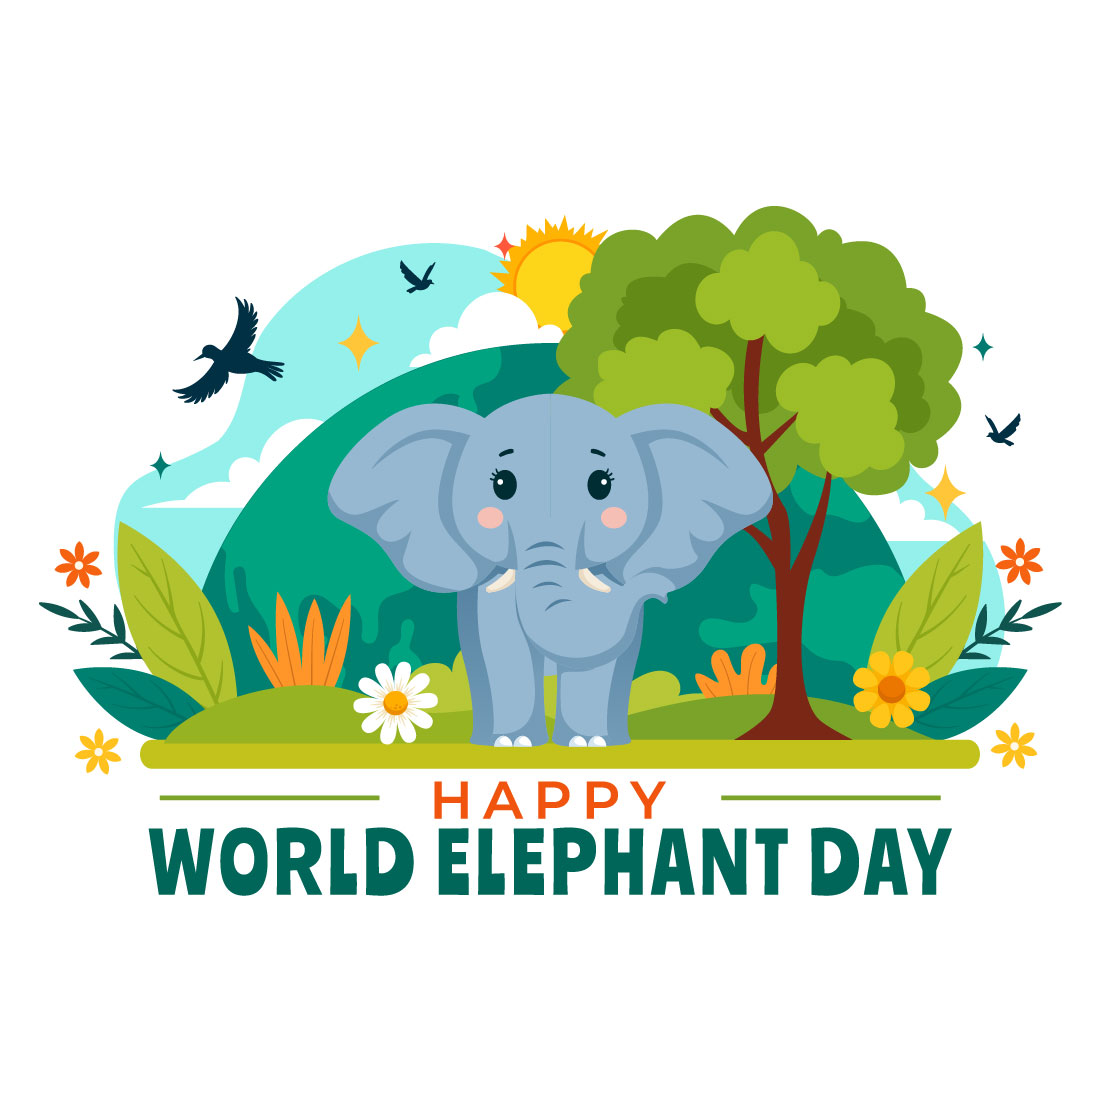 11 World Elephant Day Illustration preview image.